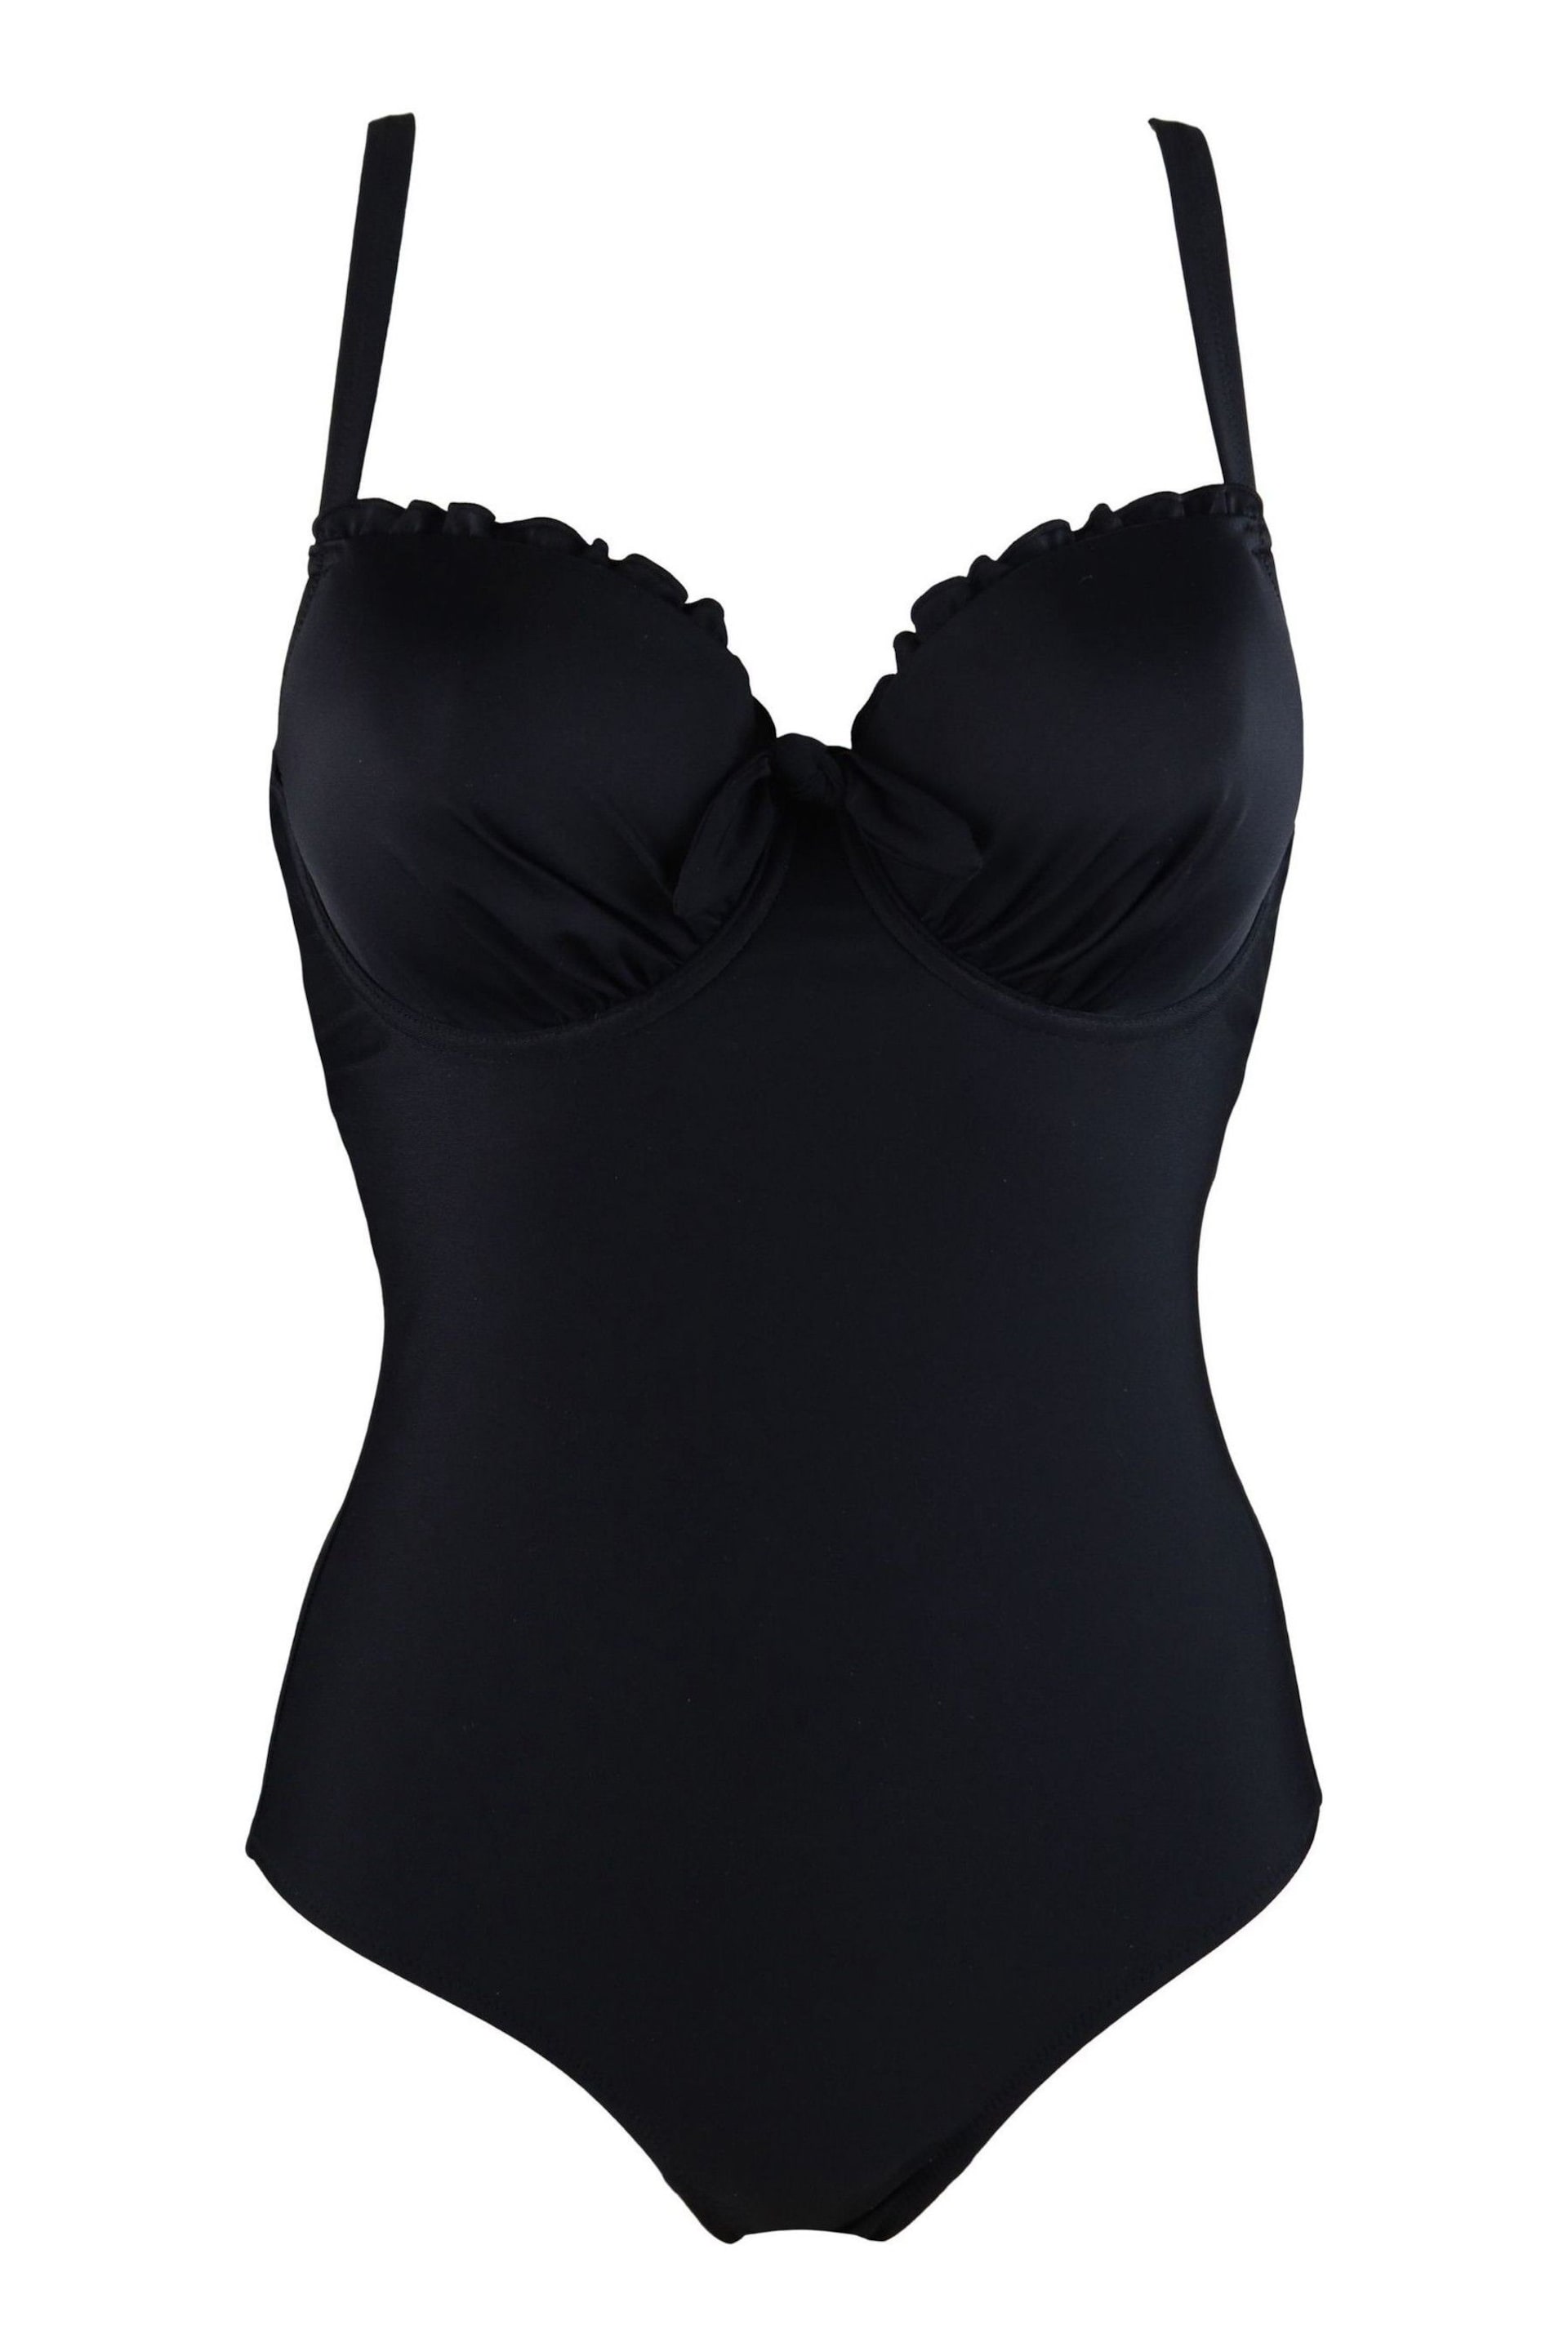 Pour Moi Black Splash Padded Underwired Control Swimsuit - Image 4 of 5